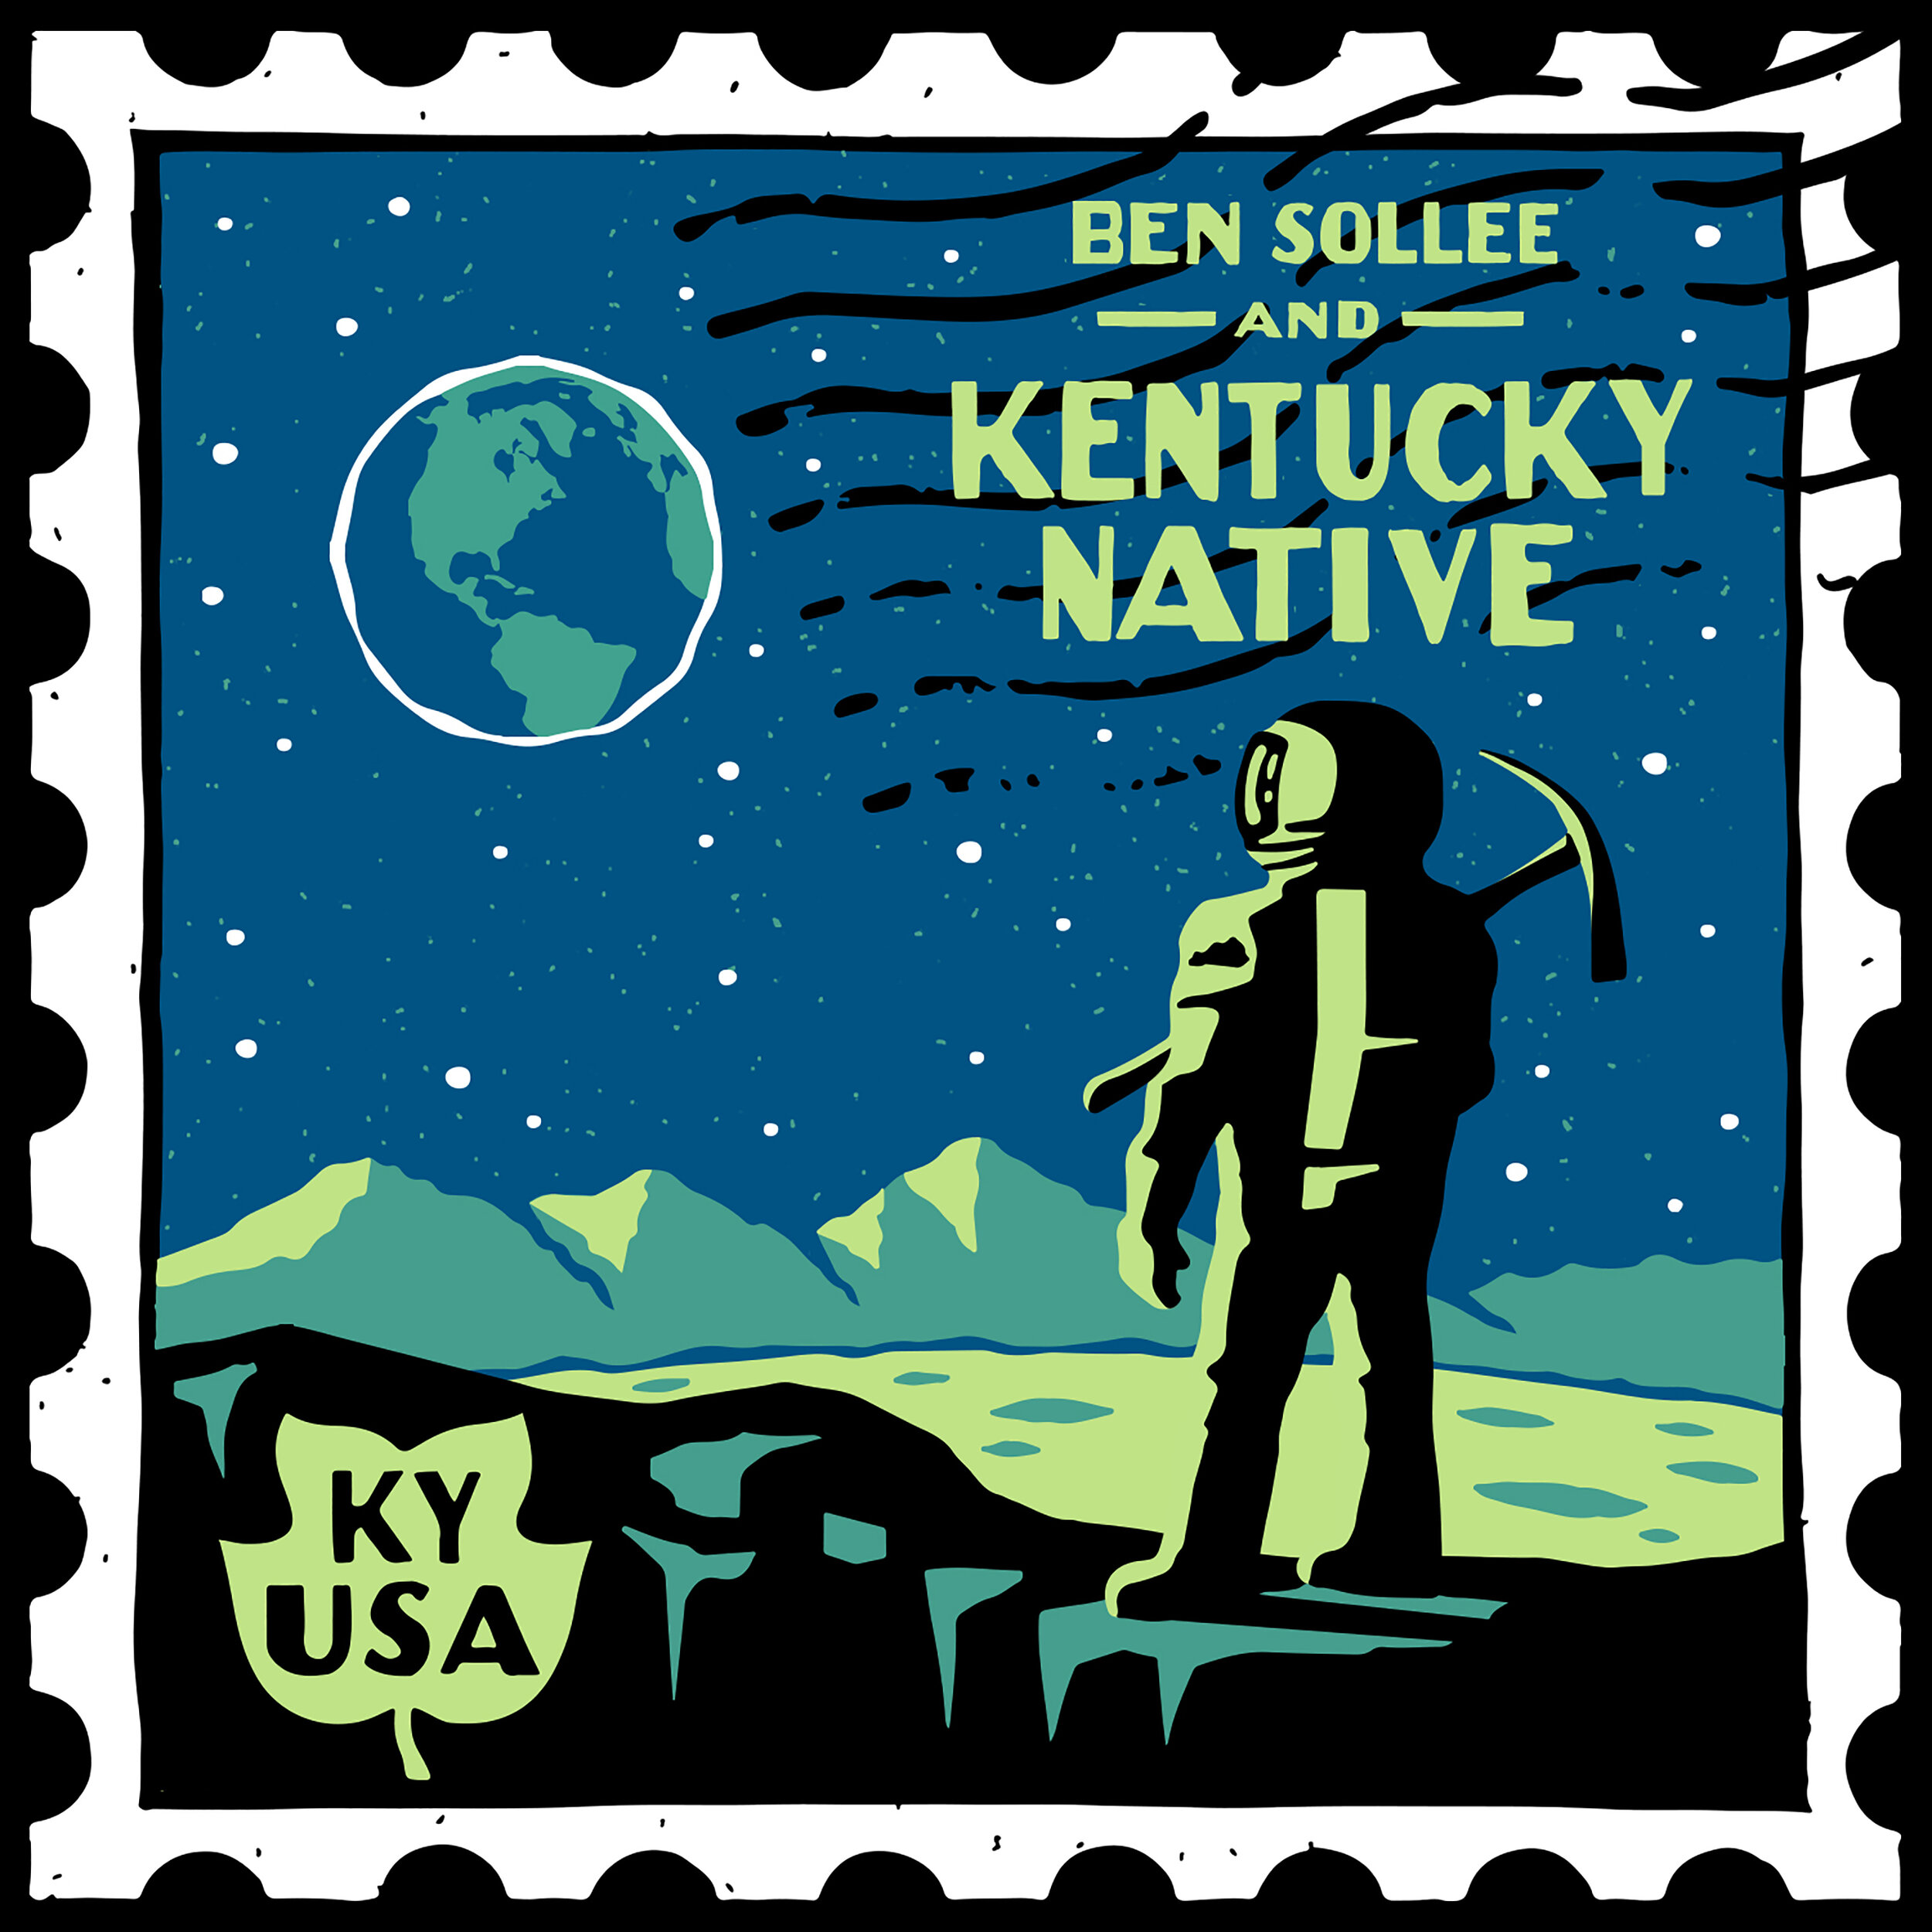 Kentucky NativeSollee’s 6th studio album, Kentucky Native breathes new life into the practice of bluegrass music. Recorded in a lakeside cabin in 2017, producer Alex Krispin and Sollee blend together influences from Kentucky’s more recent immigrants.